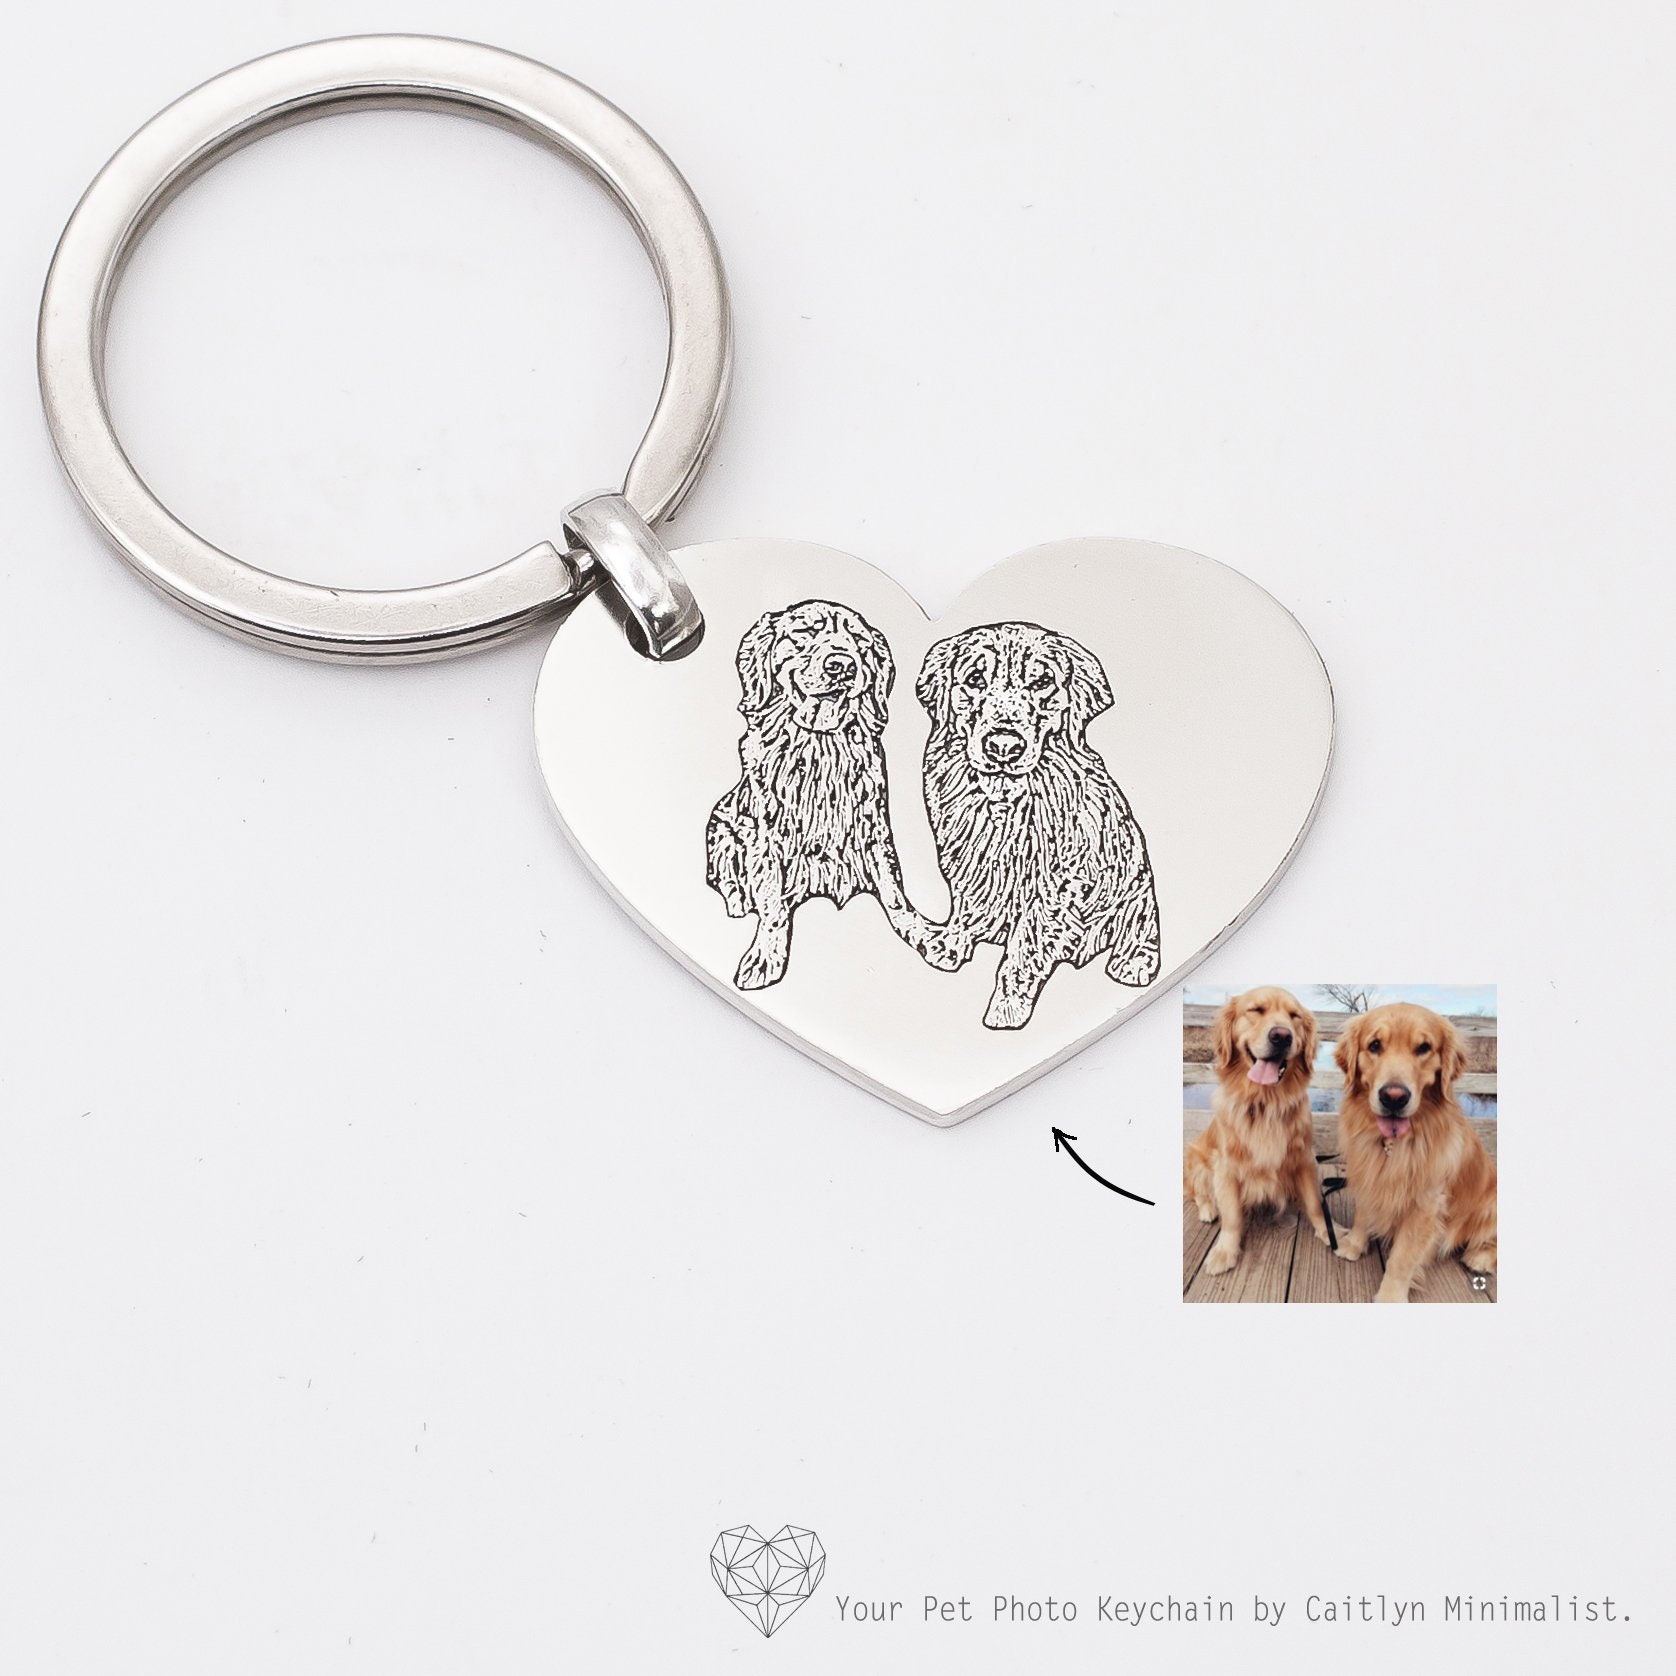 Your Pet Photo Keychain Picture Personalized Cat Custom Dog Memorial Gift Lover cm26